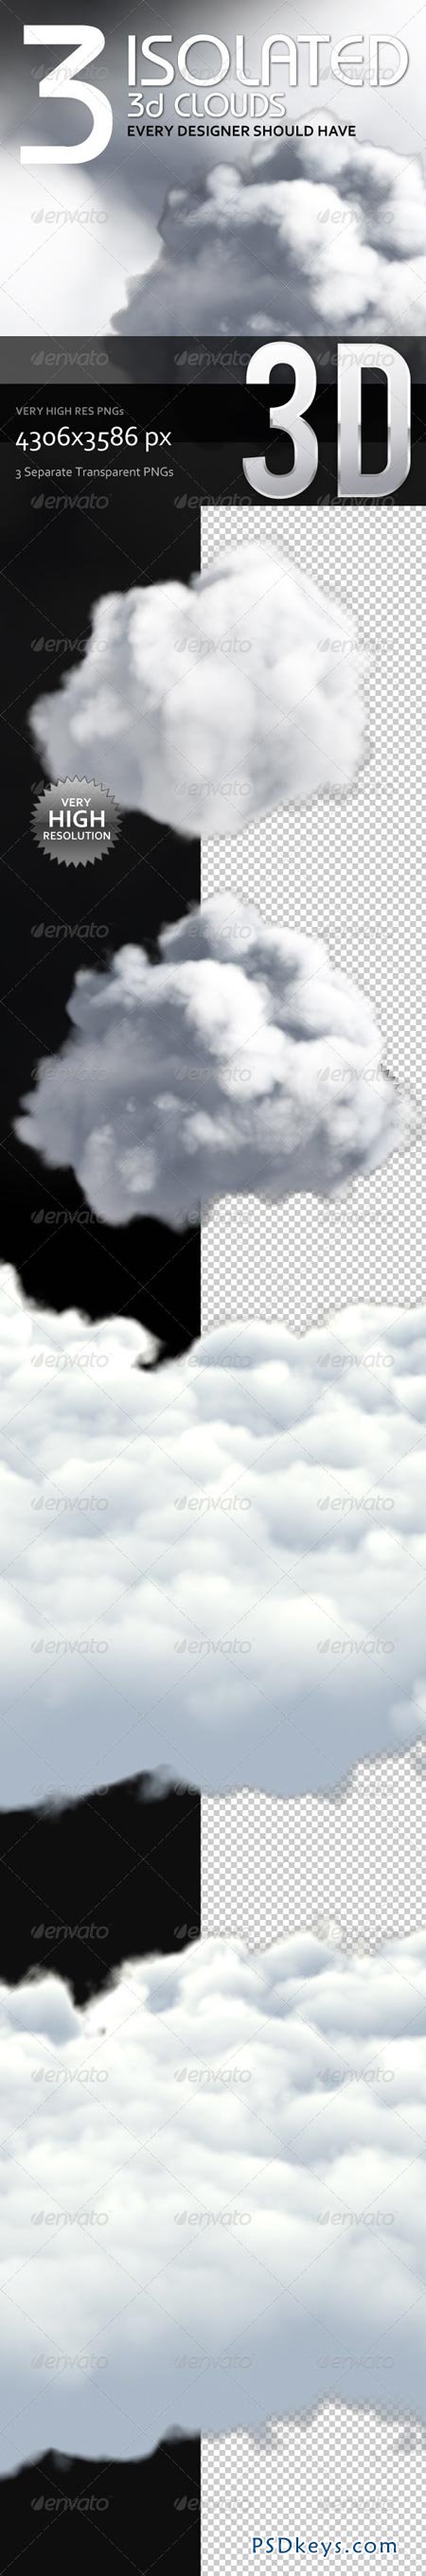 3 Isolated 3D Clouds 6452143